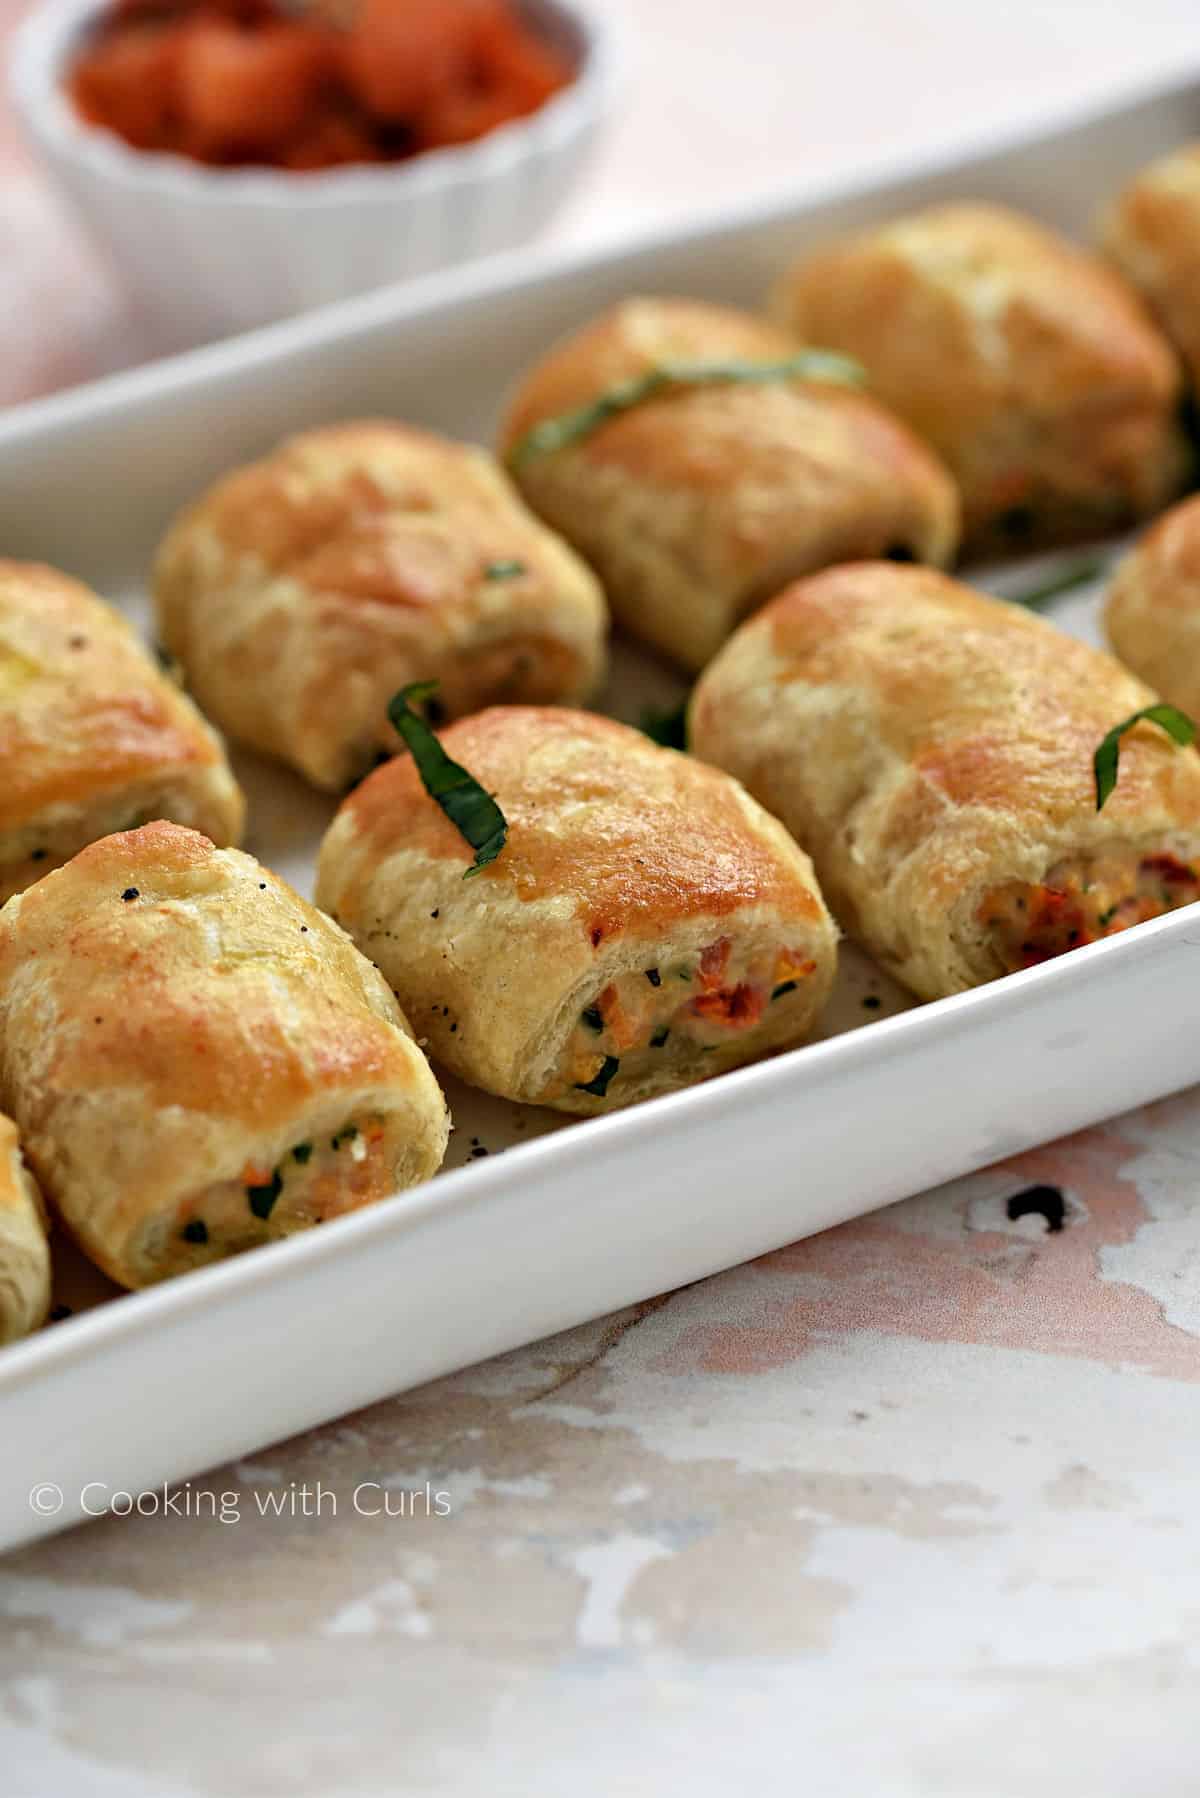 Crispy puff pastry filled with bruschetta chicken sausage rolls lined up on a serving tray.